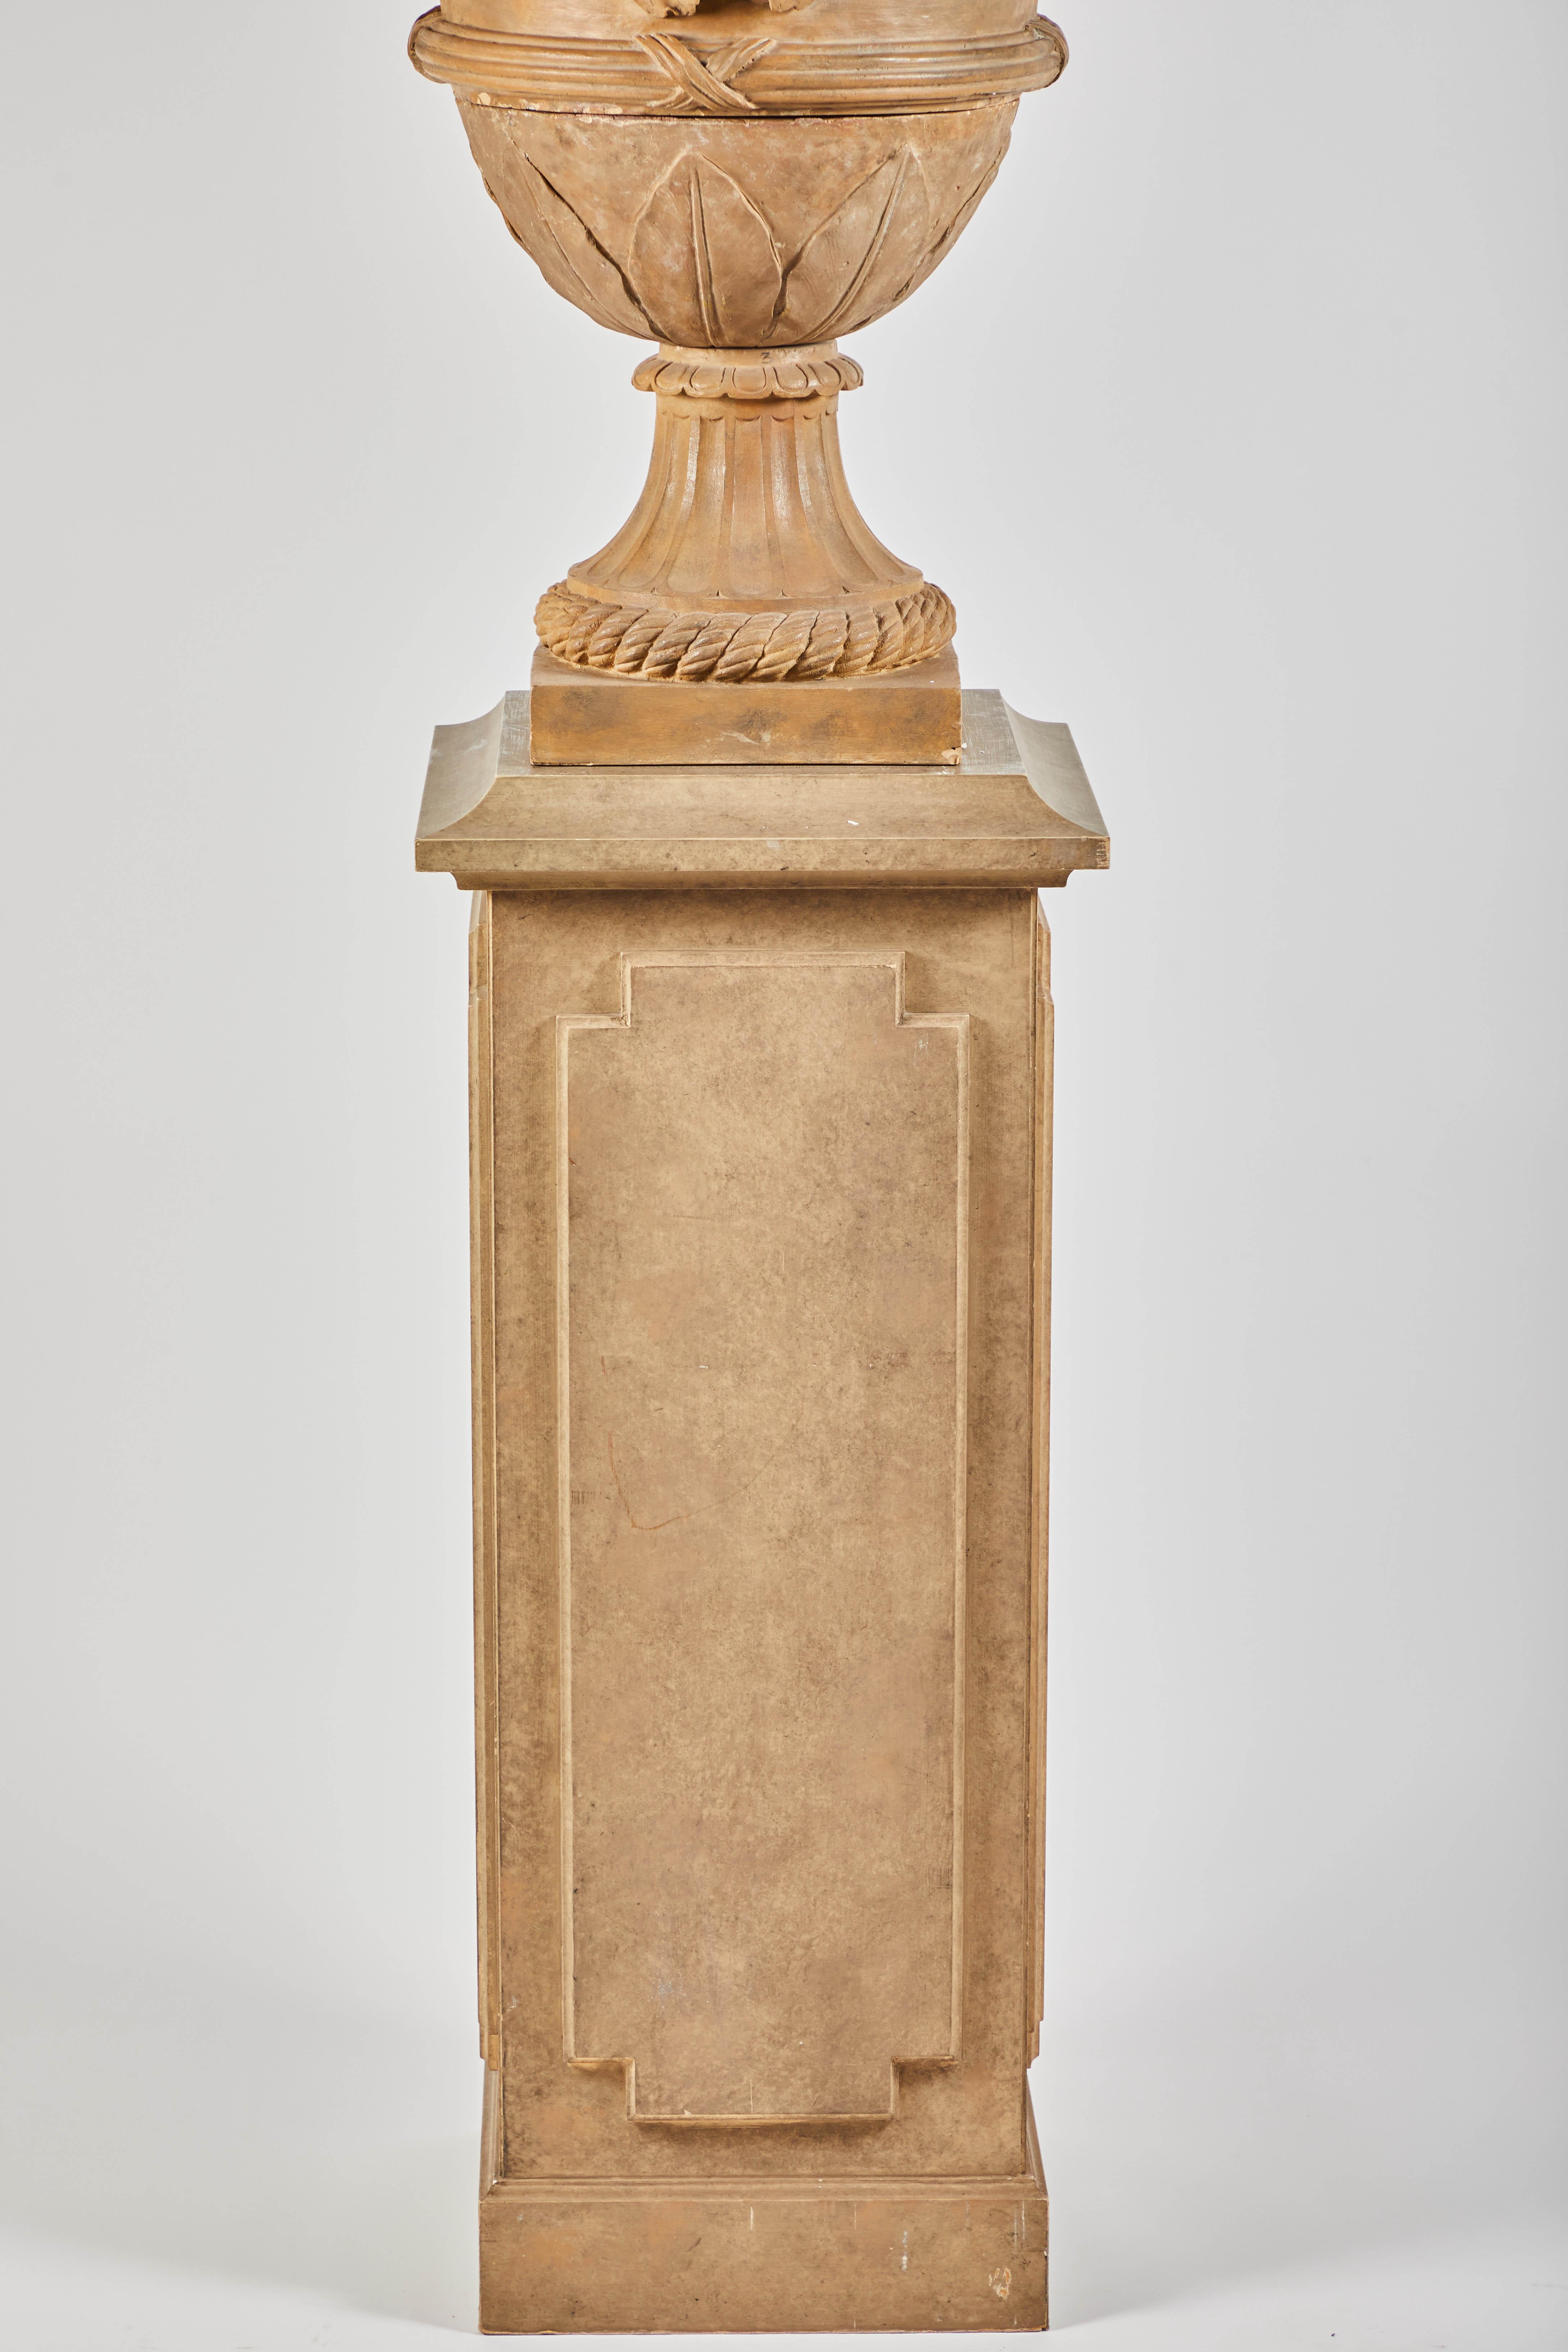 Italian 18th Century Terracotta Urns on Pedestals from the Collection of Karl Lagerfeld For Sale